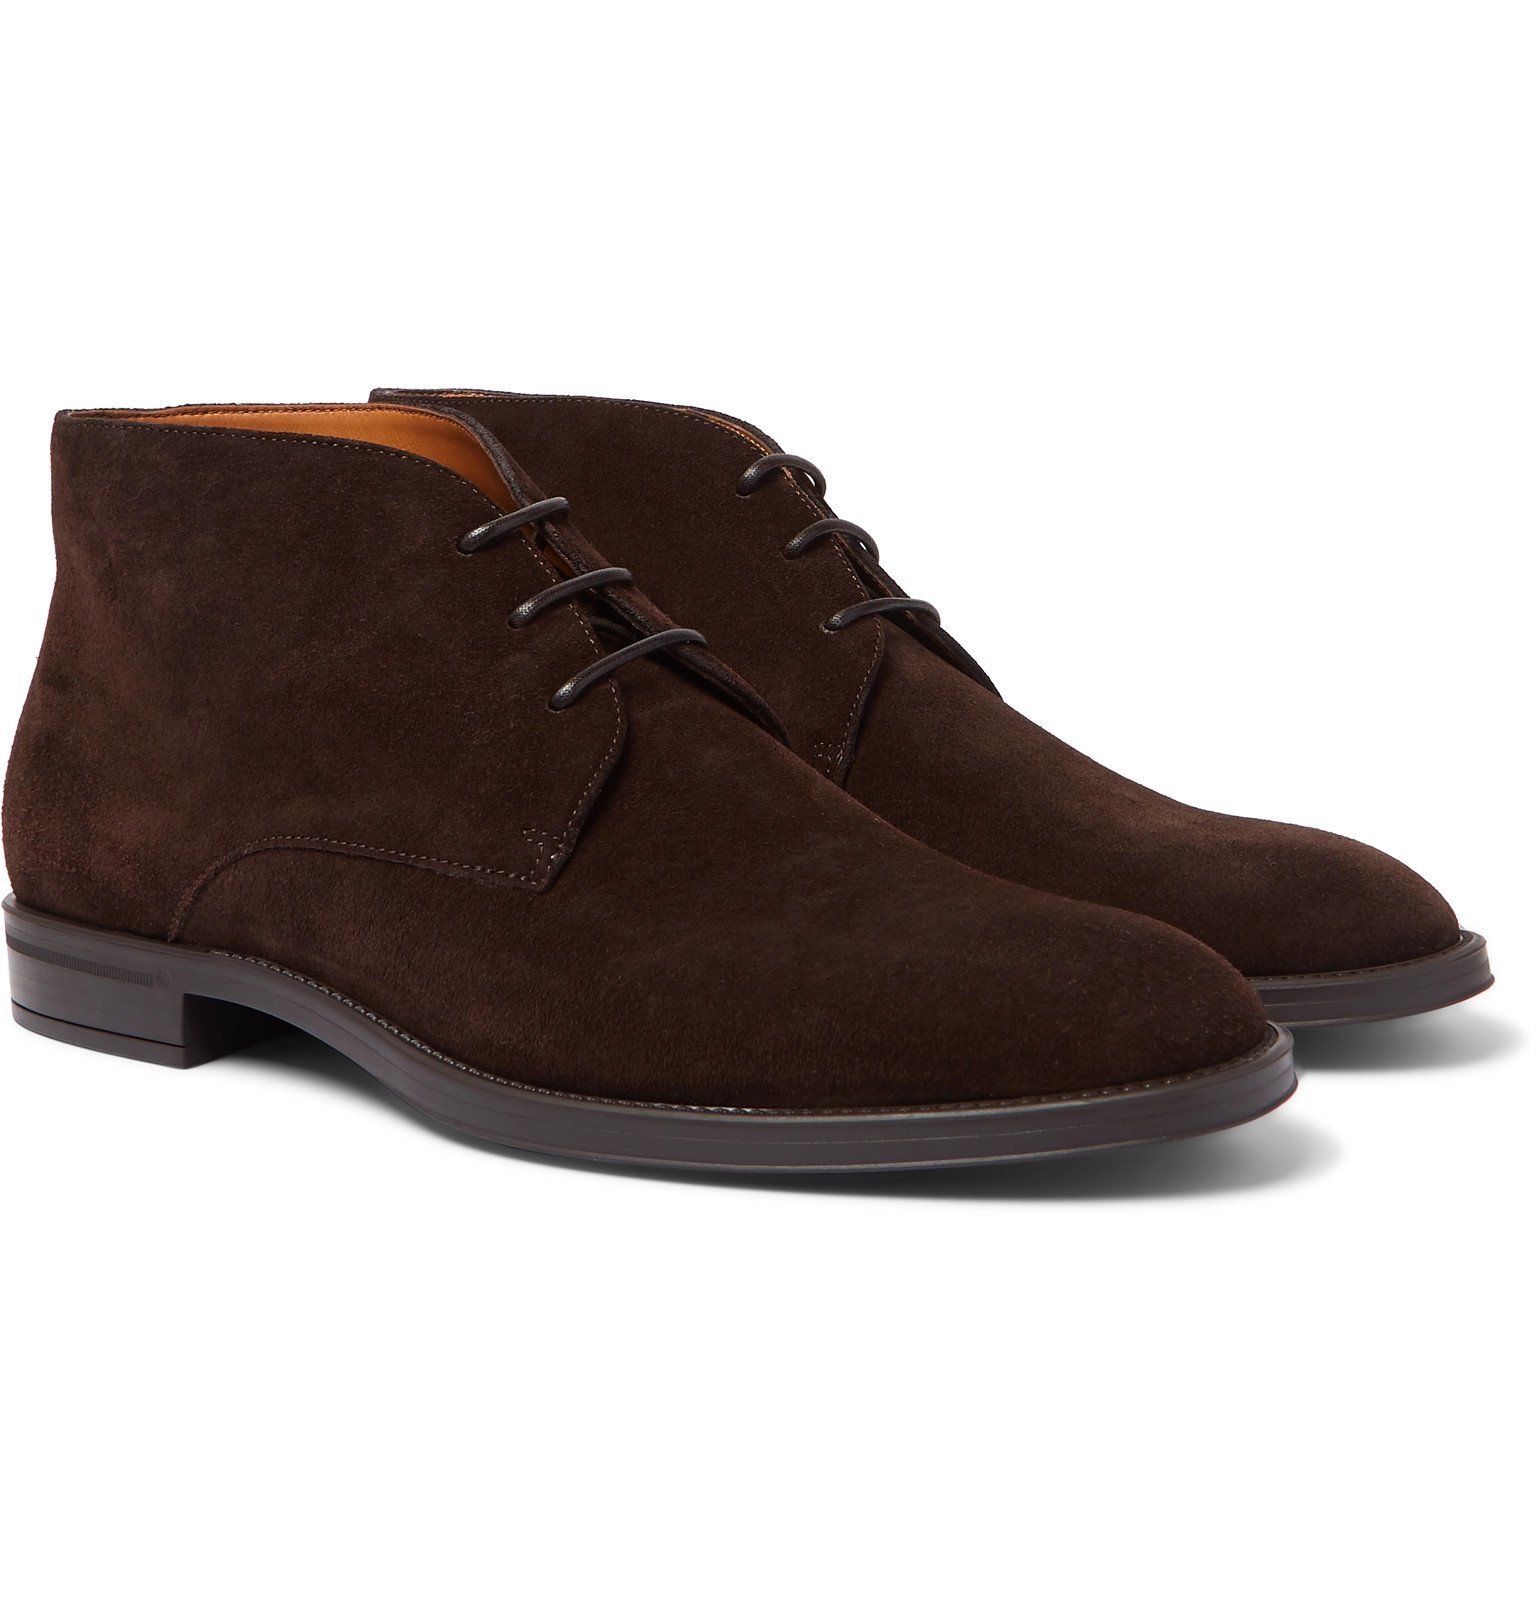 Hugo Boss - Coventry Suede Chukka Boots 